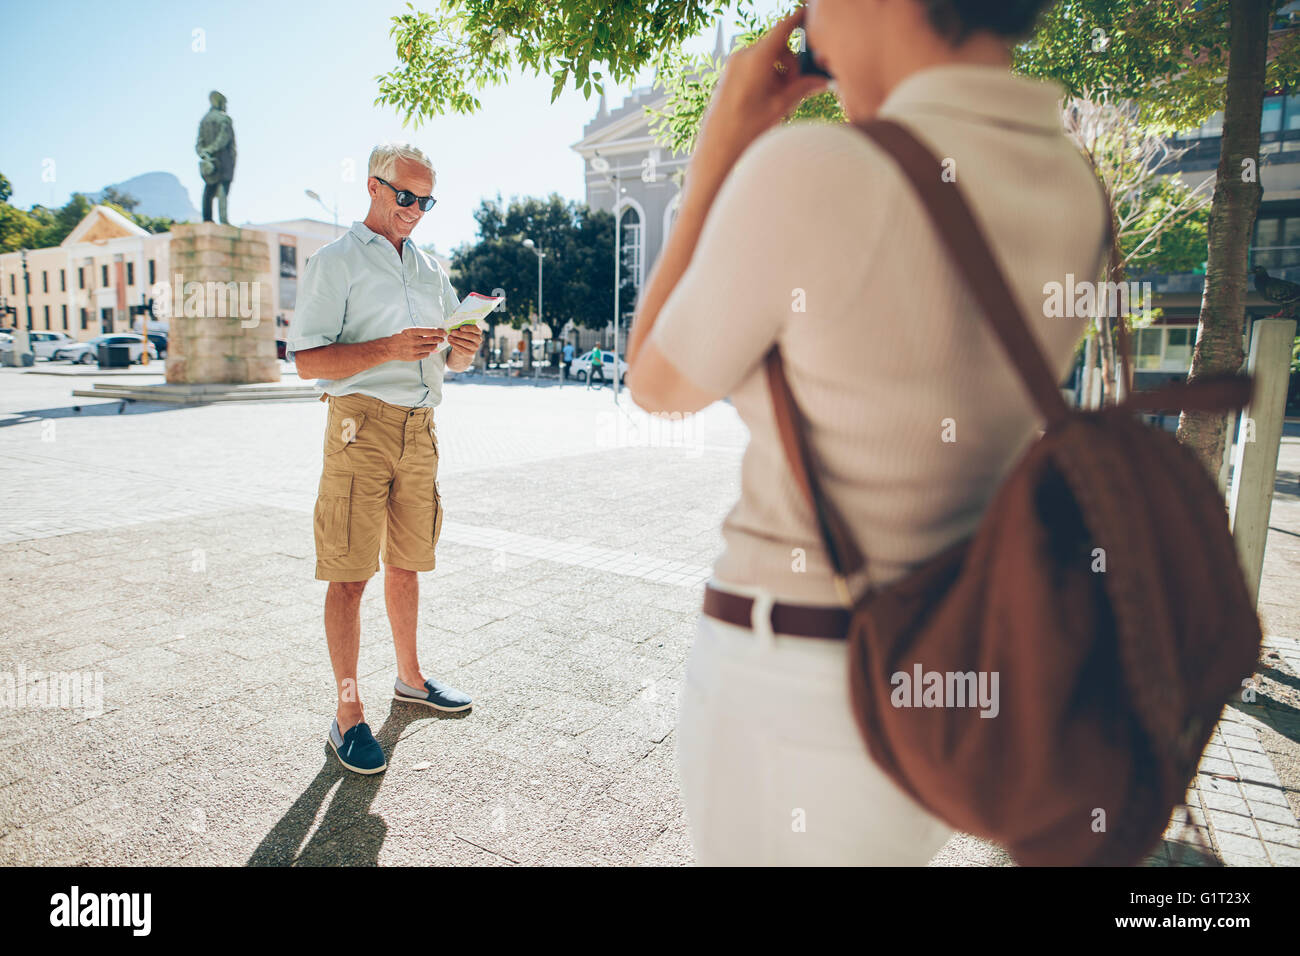 Senior man being photographer by a woman in the city during their vacation. Senior couple taking photos on their vacation. Stock Photo